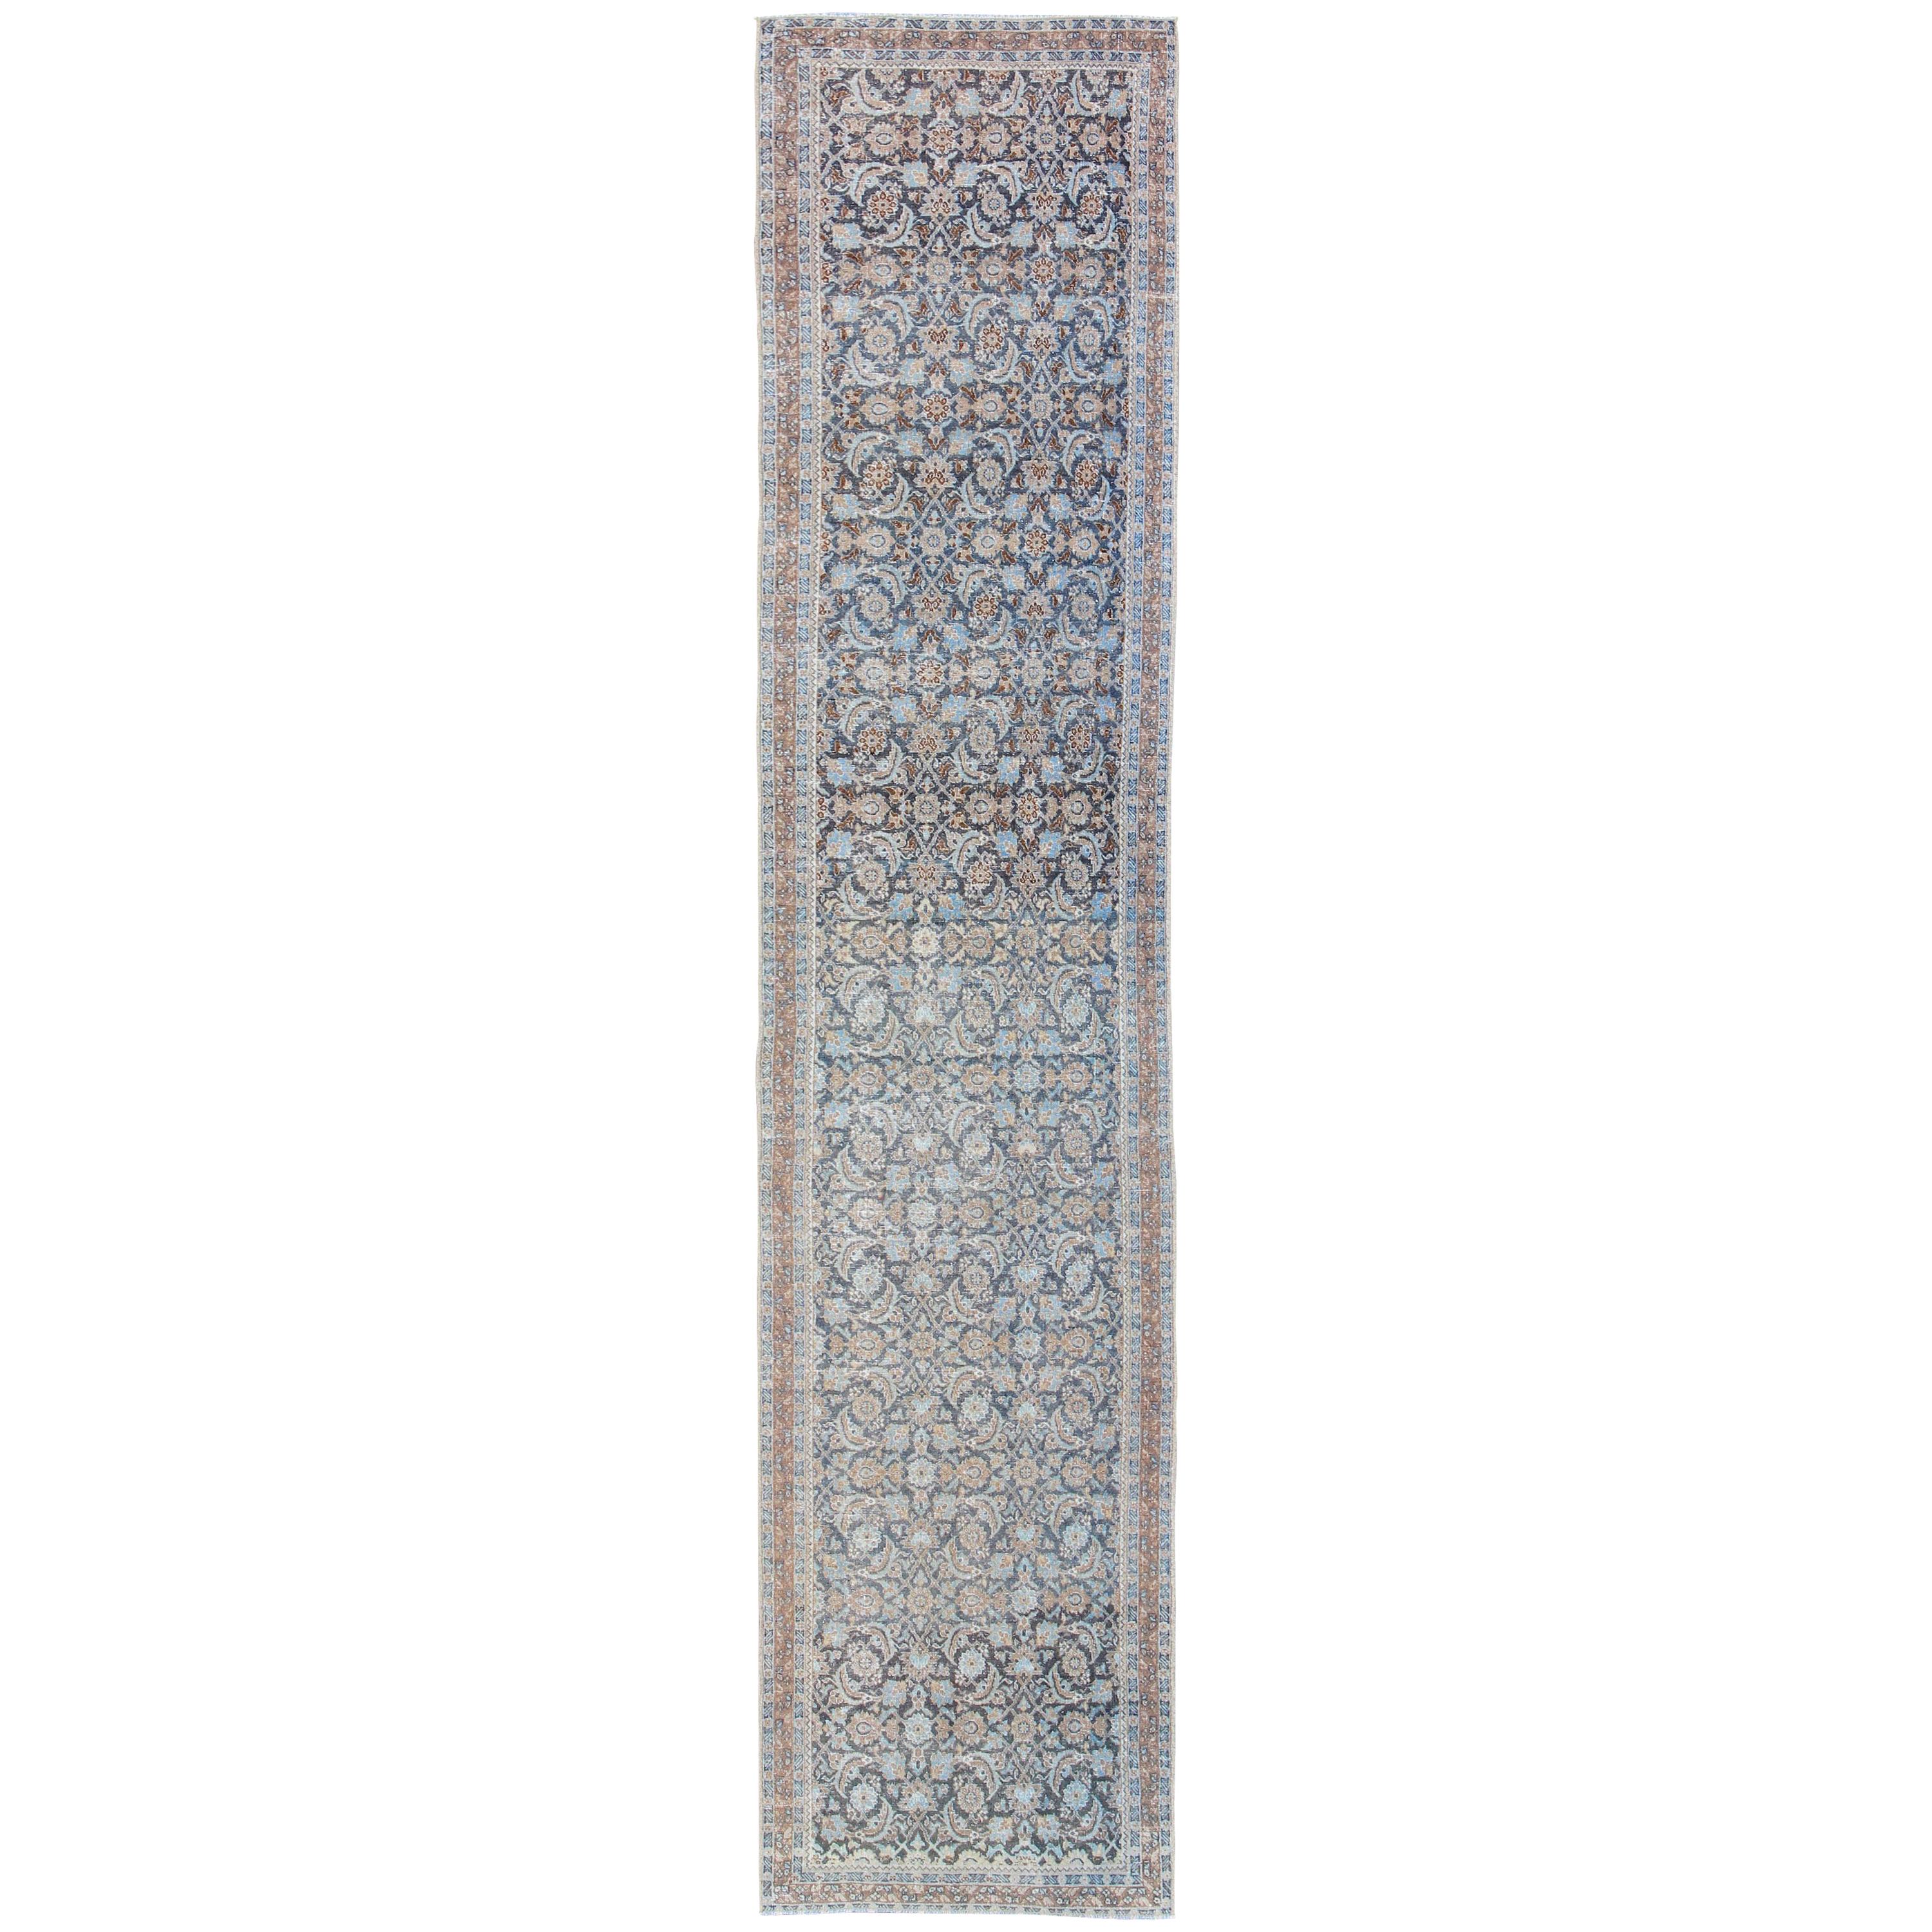 Vintage Persian Tabriz Runner with Ornate Floral Design in Blue and Taupe For Sale